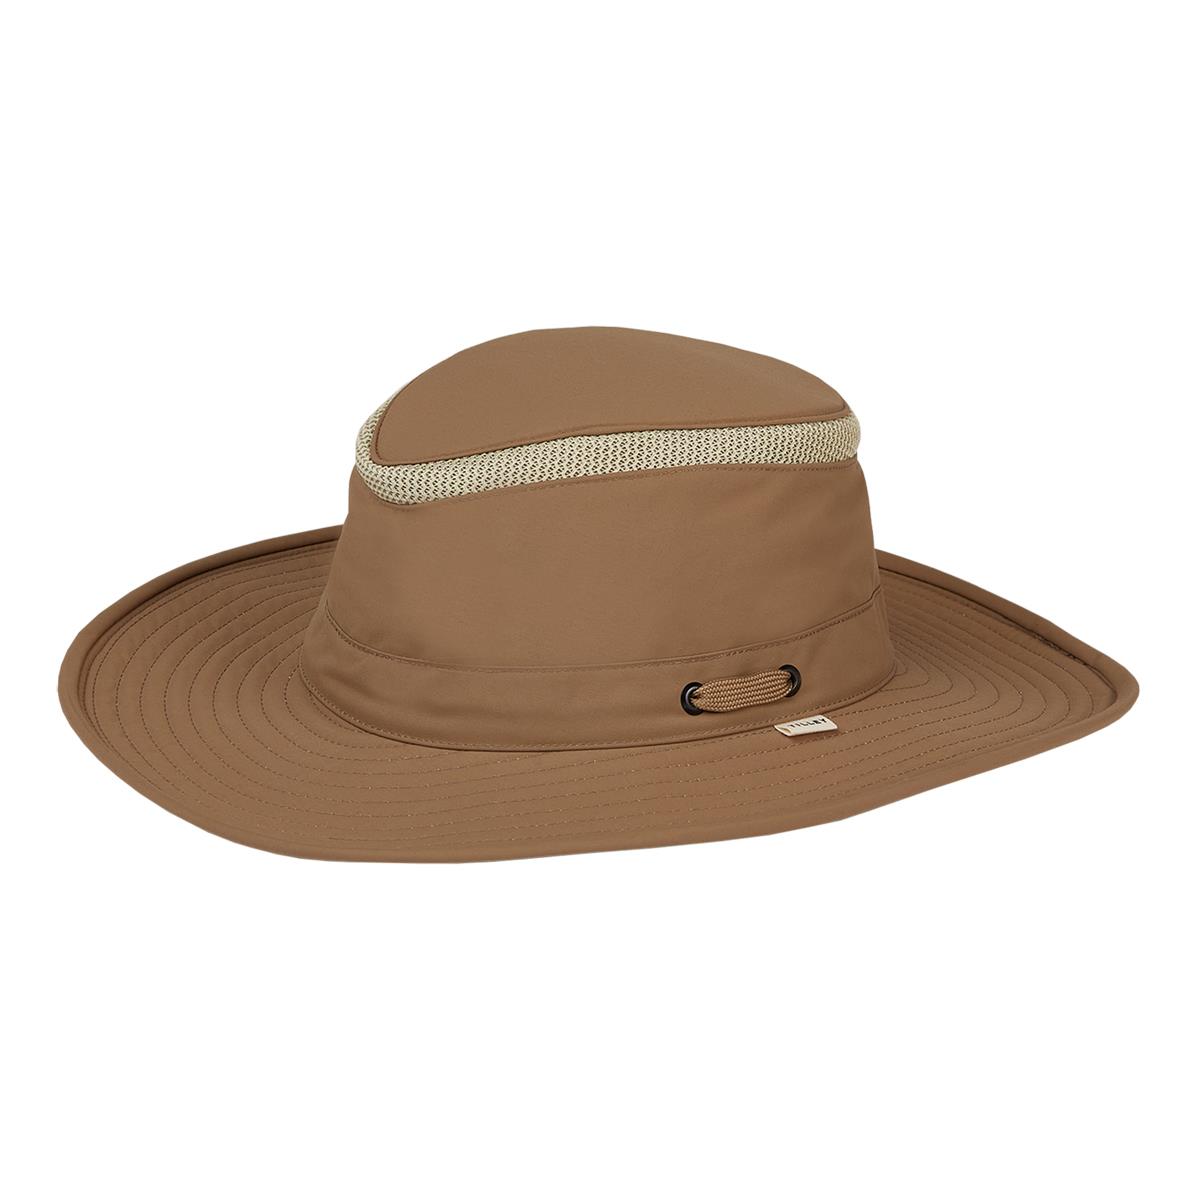 What makes the Tilley Airflo Hat keep you cool on adventures?